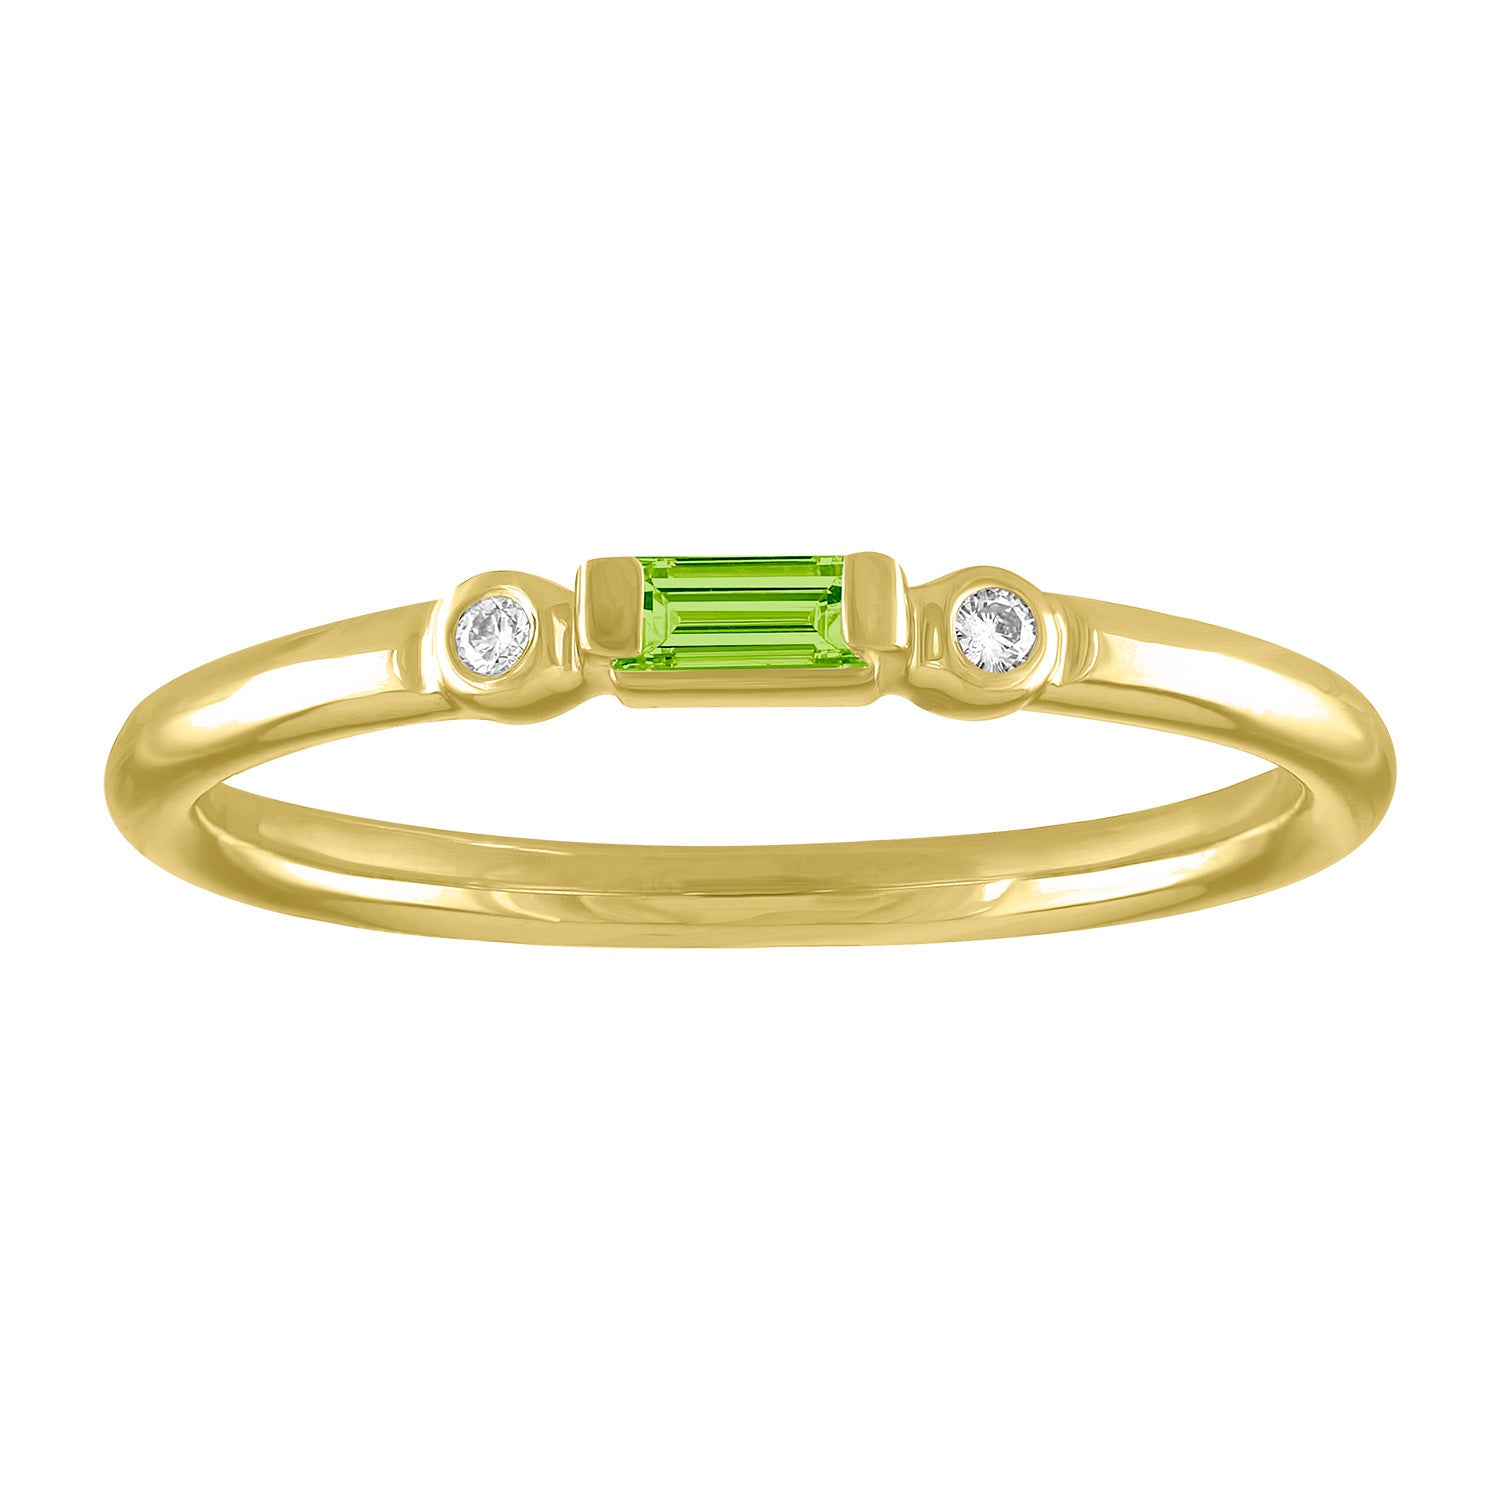 Yellow gold skinny band with a peridot baguette in the center and two round diamonds on the side. 